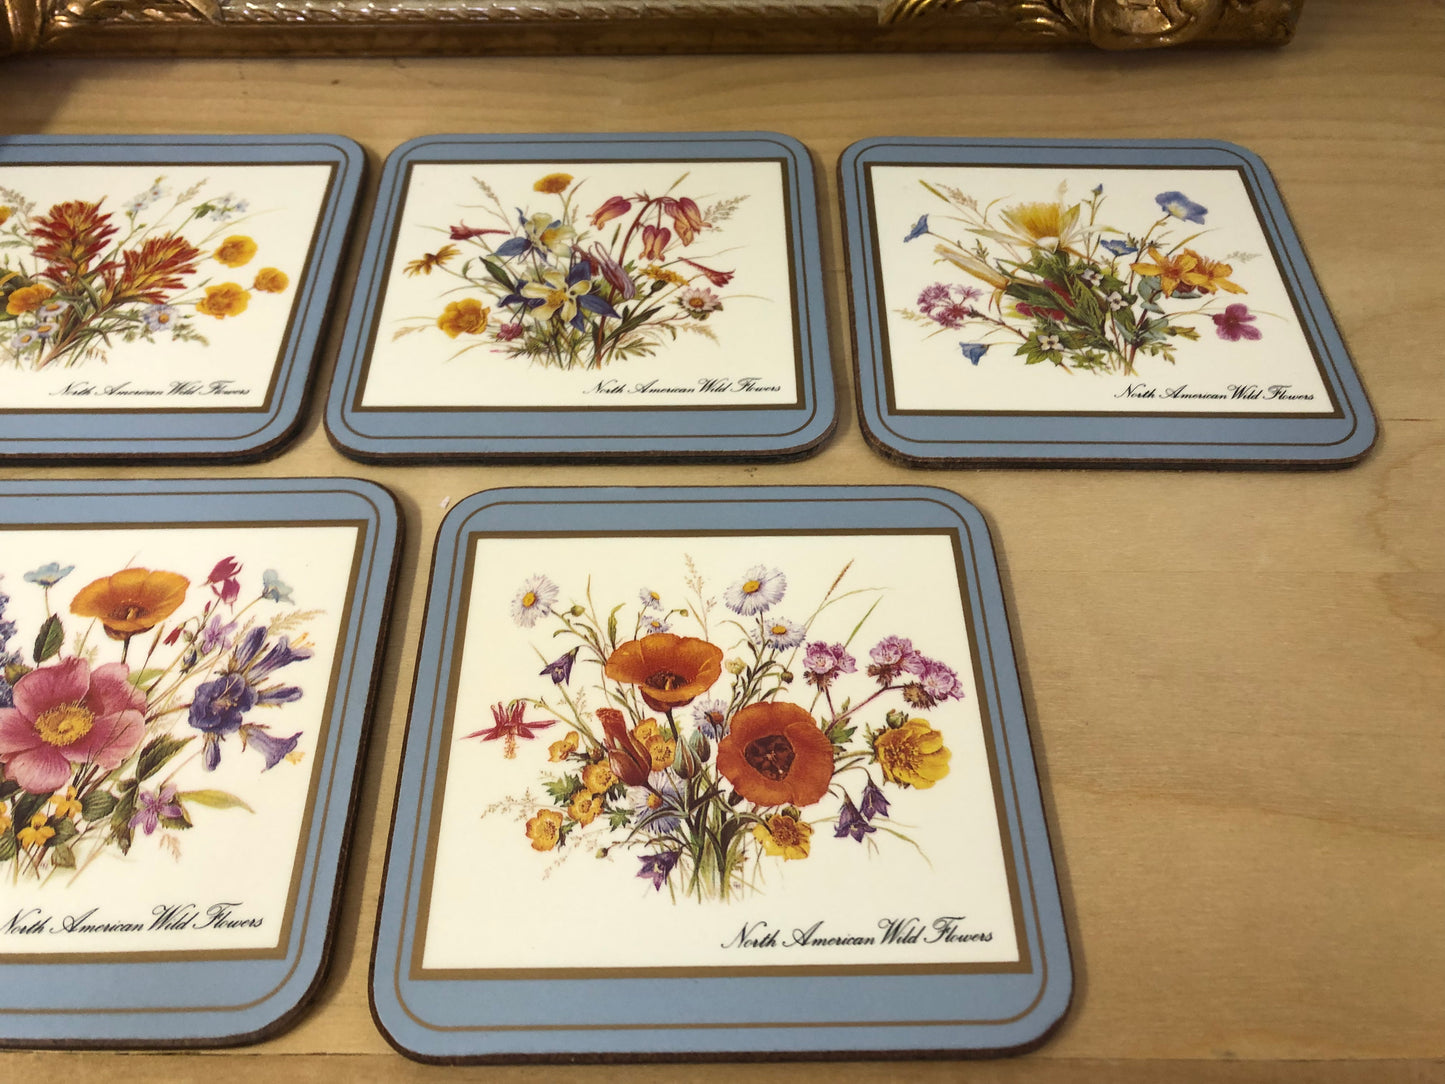 Vintage Pimpernel wildflowers coasters (set of 6) - Excellent condition!